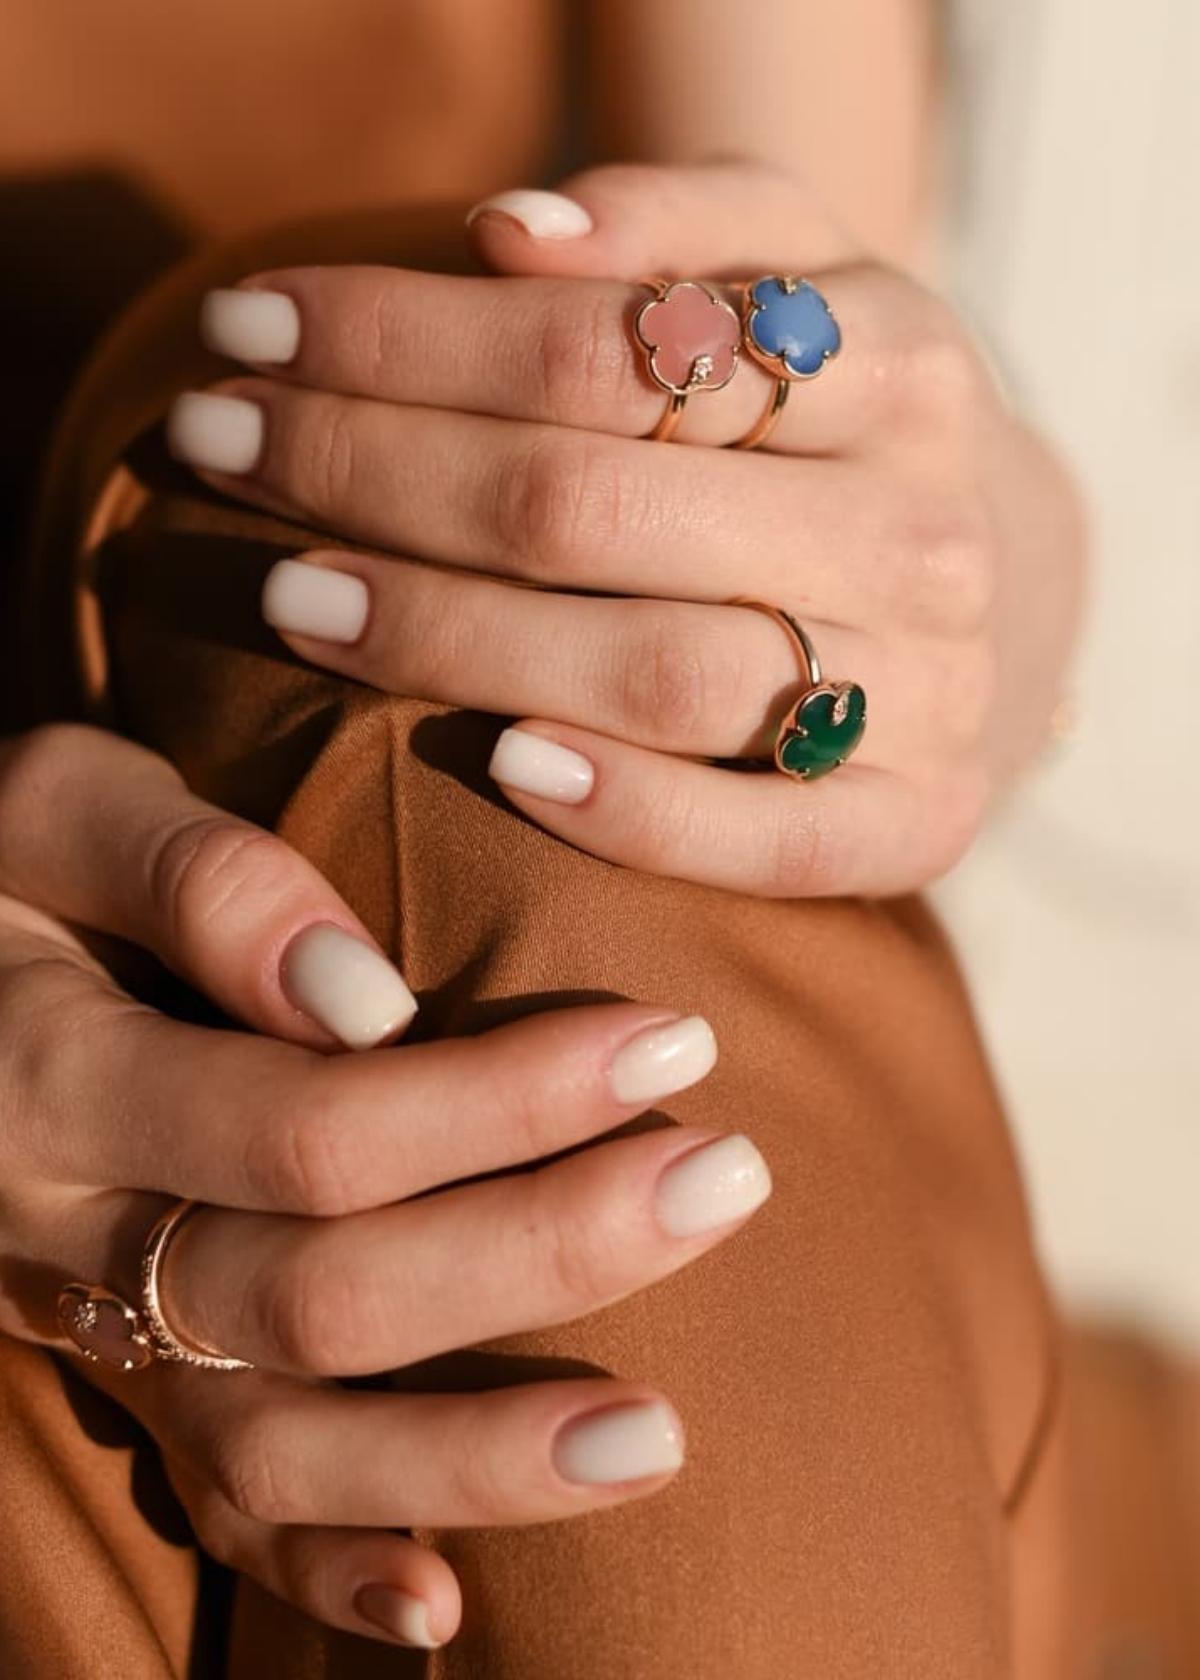 Petit Joli Ring in 18k Rose Gold with Blue Moon (White Agate and Lapis Lazuli doublet), White and Champagne Diamonds.

Petit Joli is a floral dream on your skin. The collection is designed for women always blooming in a free soul. This collection